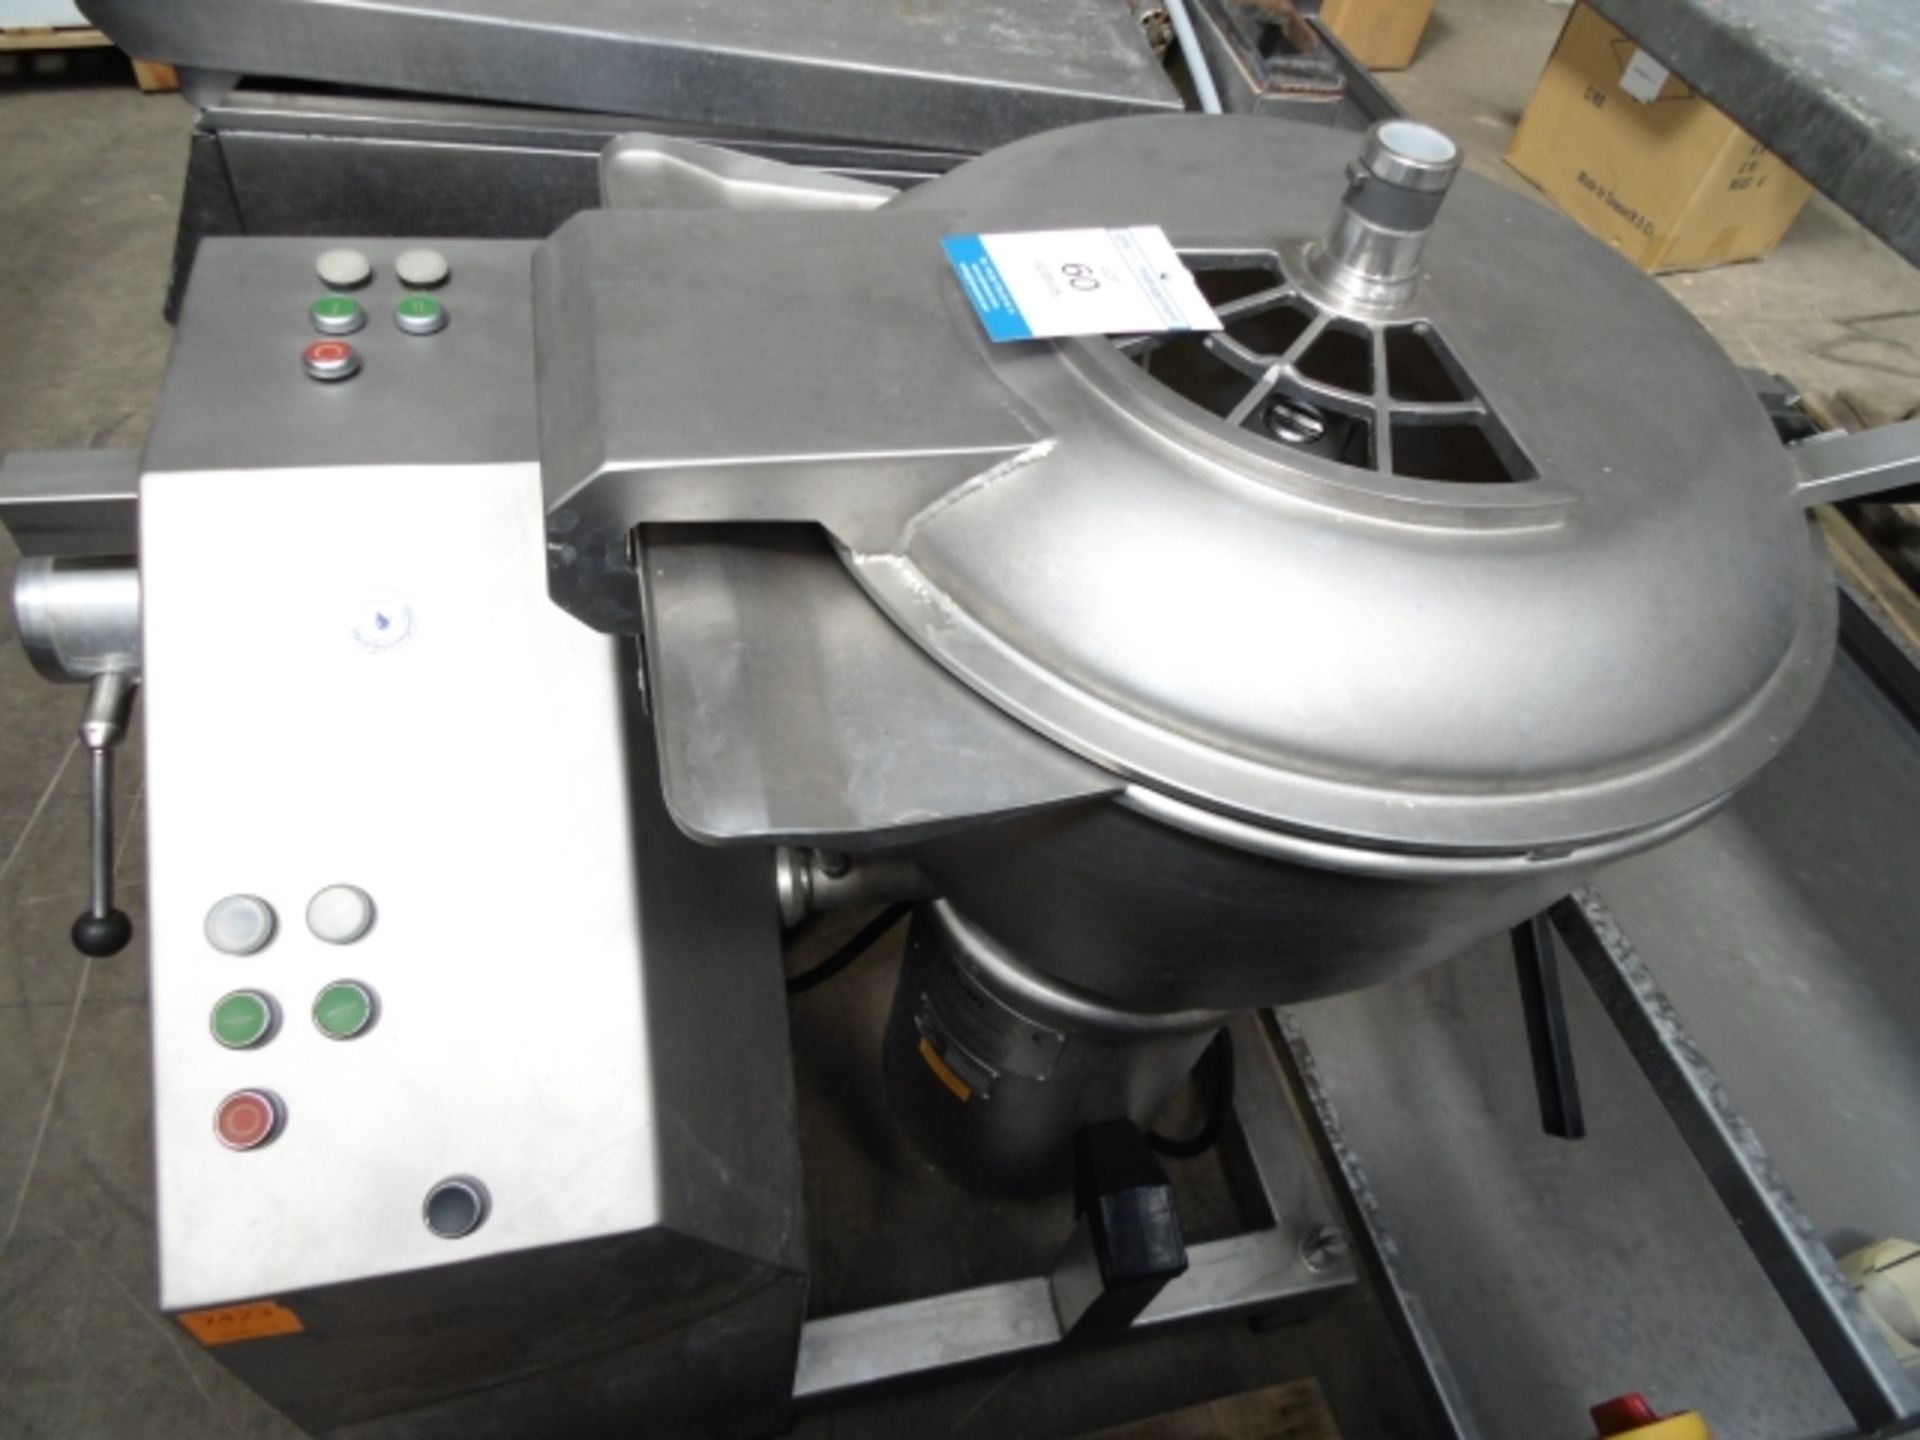 * 1997 Stephan type UM44S Universal Stainless Steel Vertical Cutter Mixer; 3 phase - 400V; serial no - Image 2 of 5